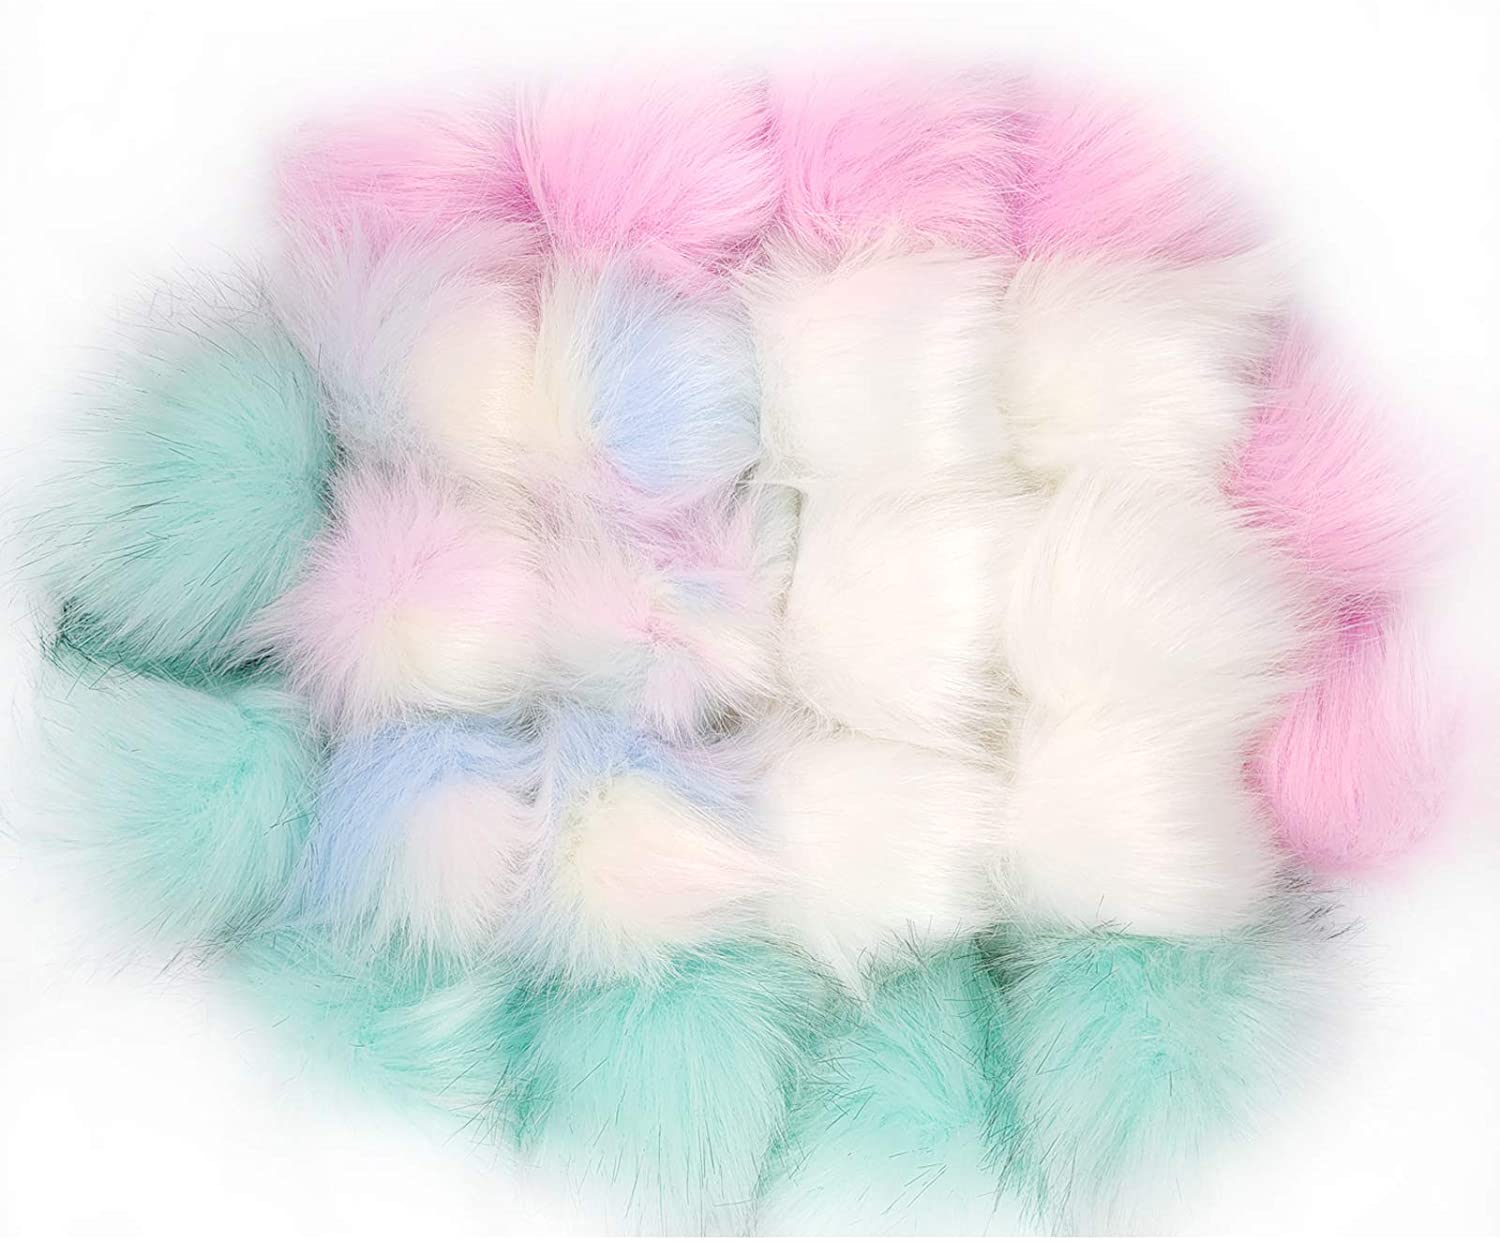 Upriver 24 PCS 4Inch DIY Faux Pom Pom Balls,Fur Fluffy Pompom Ball with Elastic Loop Hats Pom Pom Ball for DIY Crafts Hats Shoes Bags Accessories